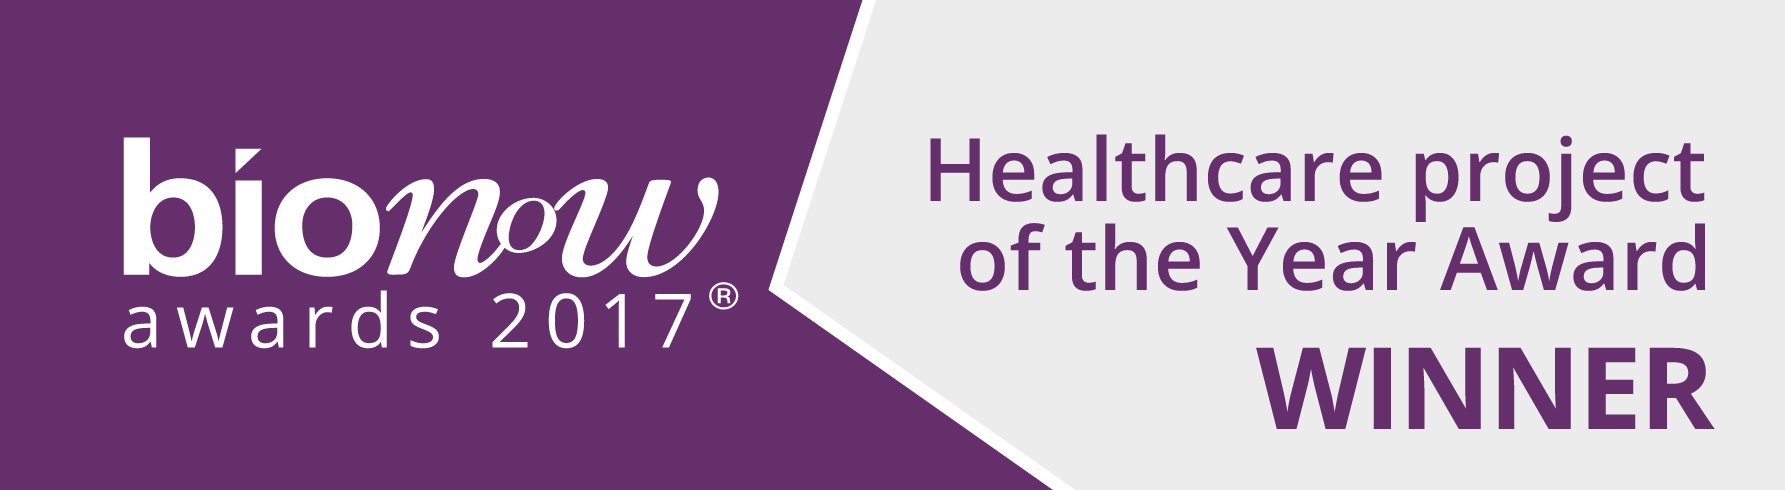 Bionow Healthcare Project of the Year Award 2017